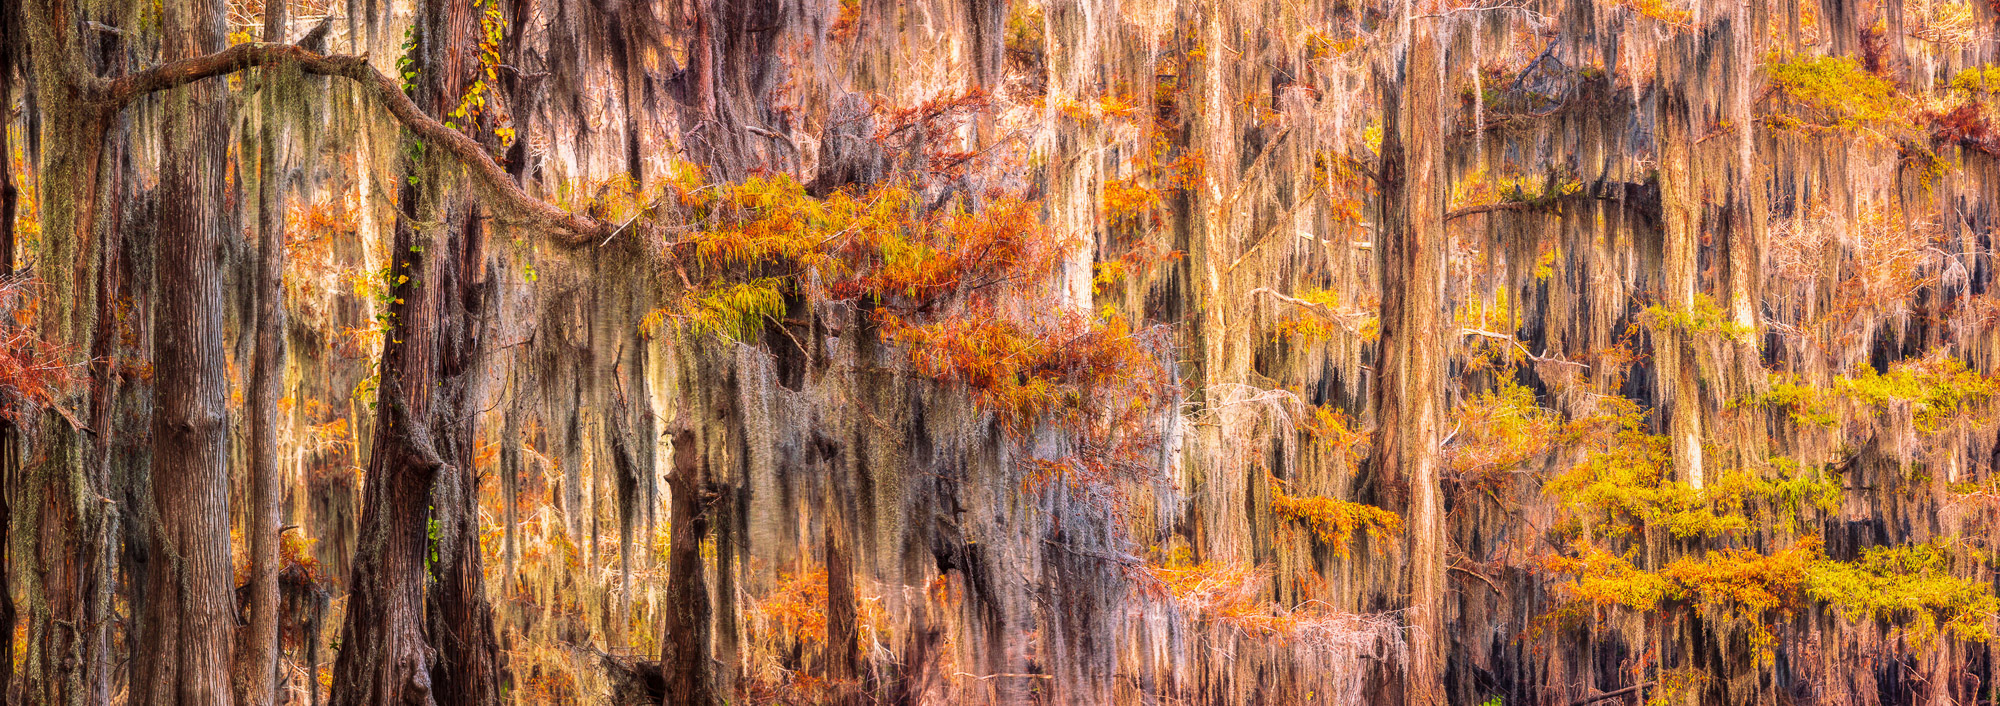 I had long wanted to shoot Caddo lake. After seeing many incredible images from this location, I finally had a chance to see...